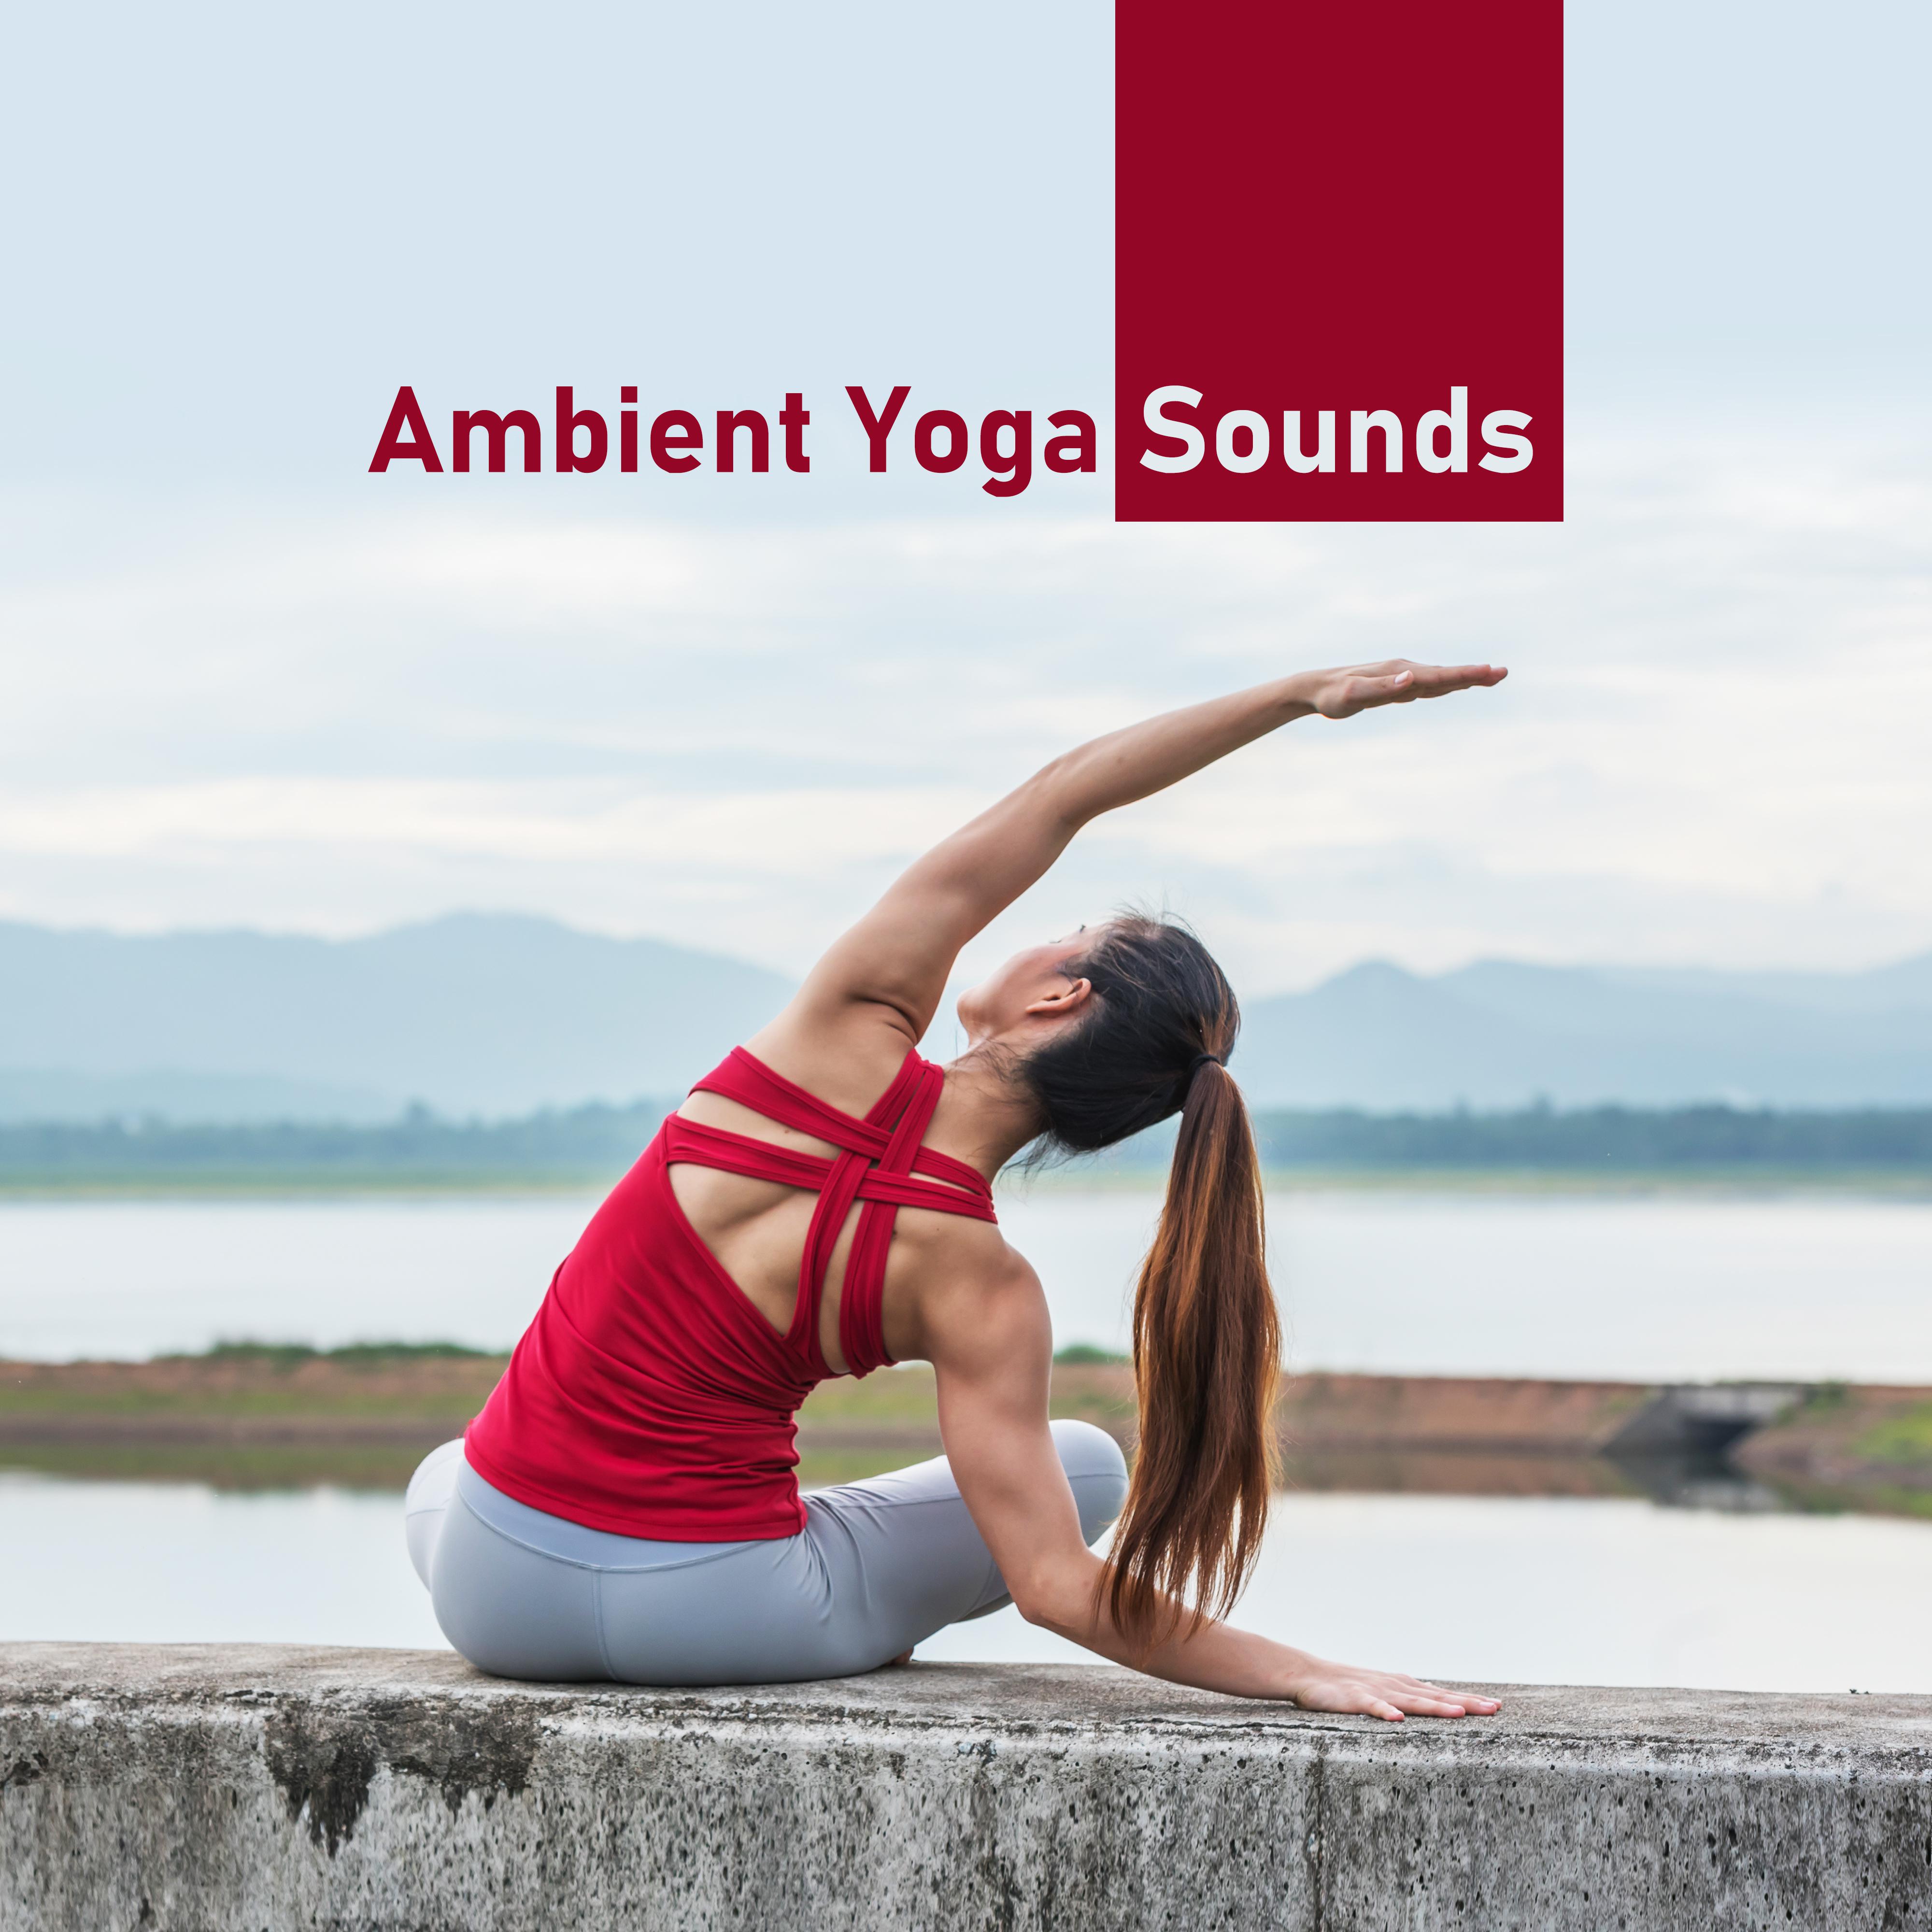 Ambient Yoga Sounds: Calm Background Music for Training and Yoga Exercises